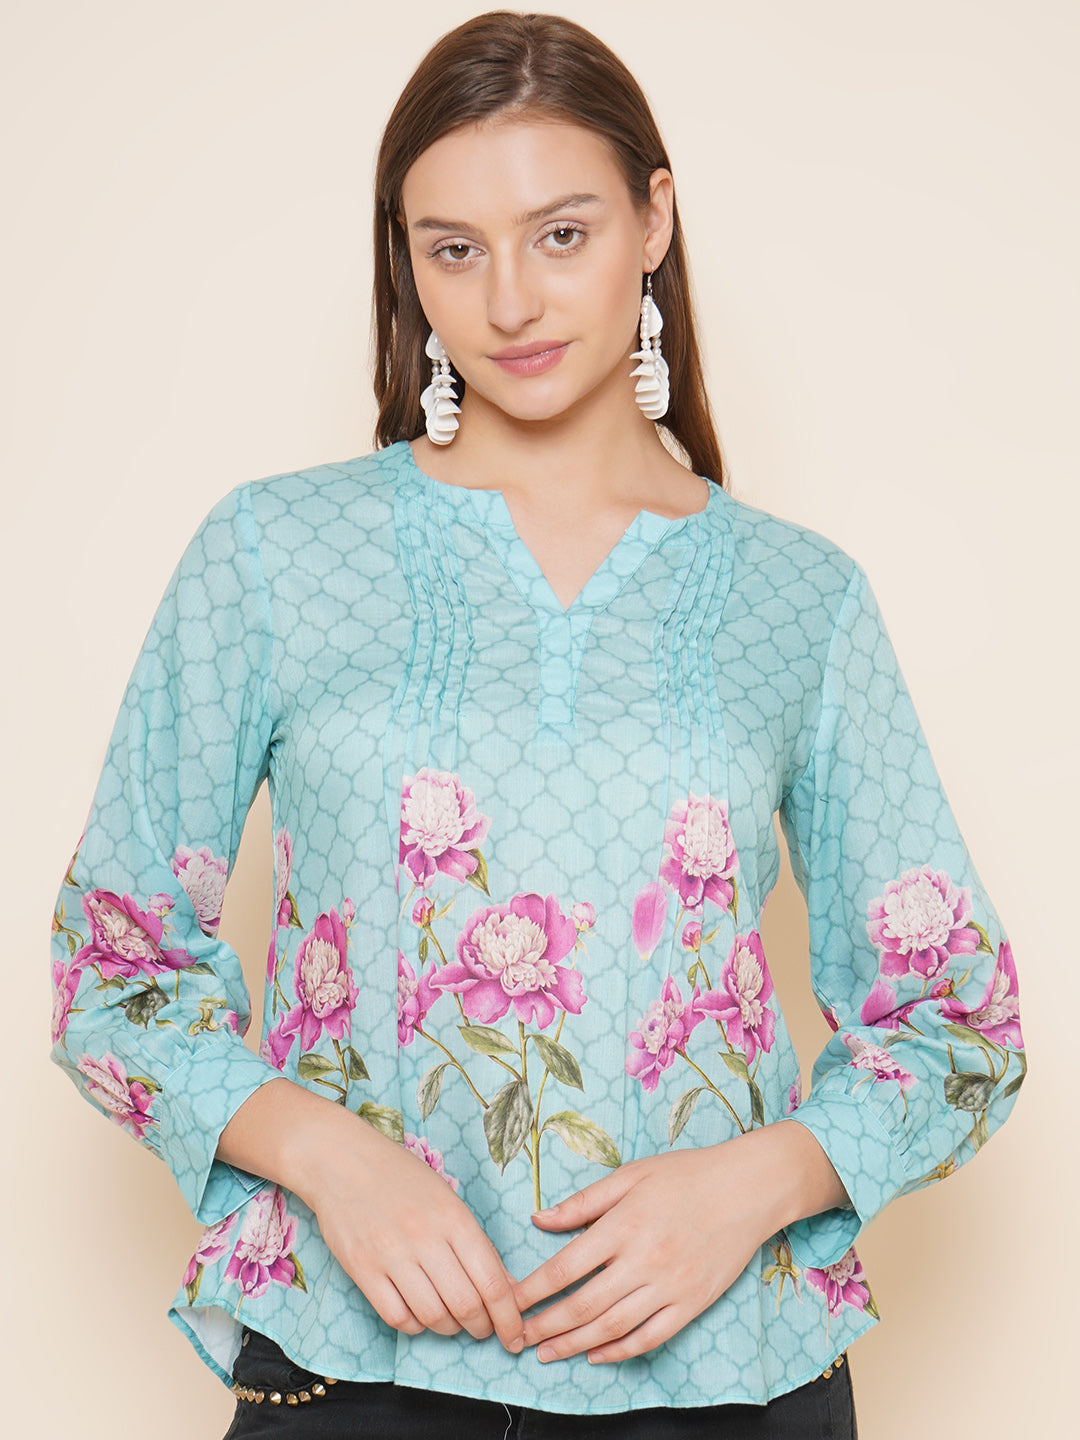 Bhama Couture Blue Purple Printed Top